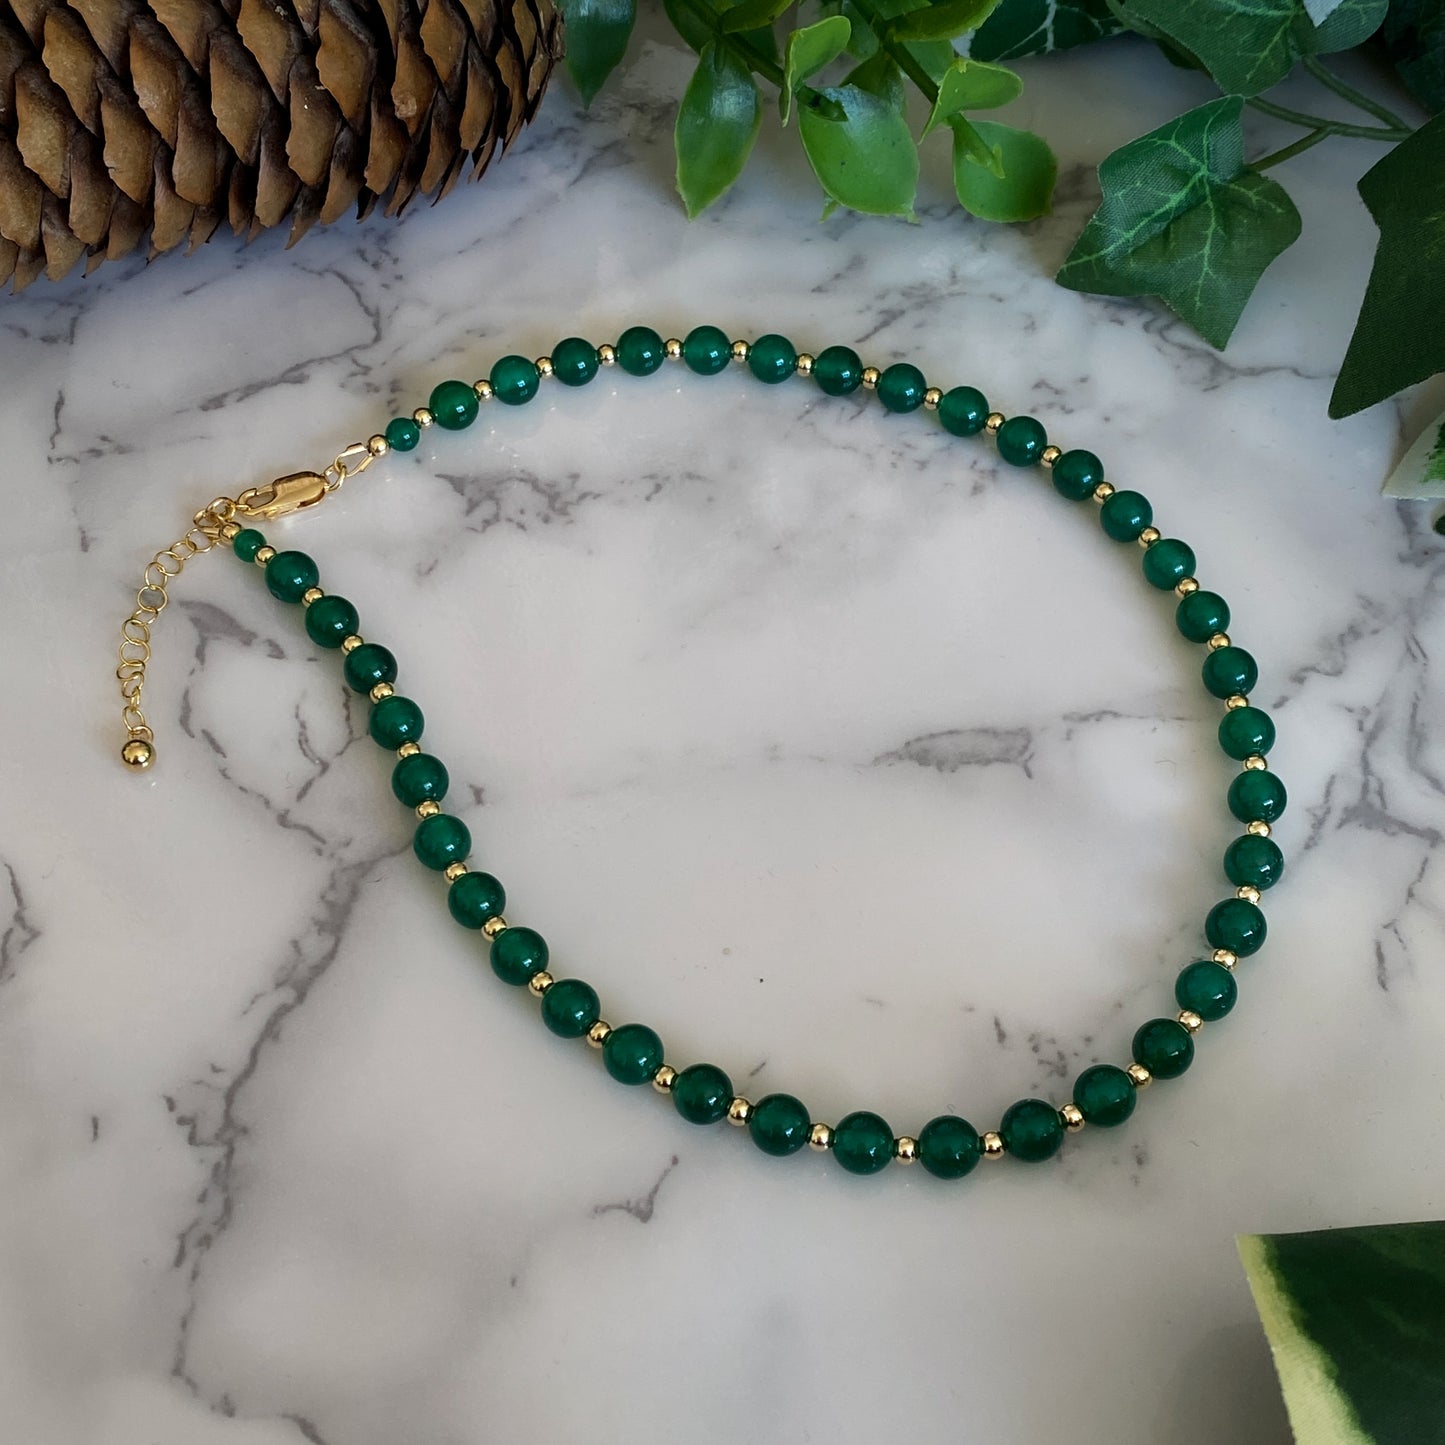 Daphne ~ Green Onyx and 14k Gold Filled Beaded Necklace